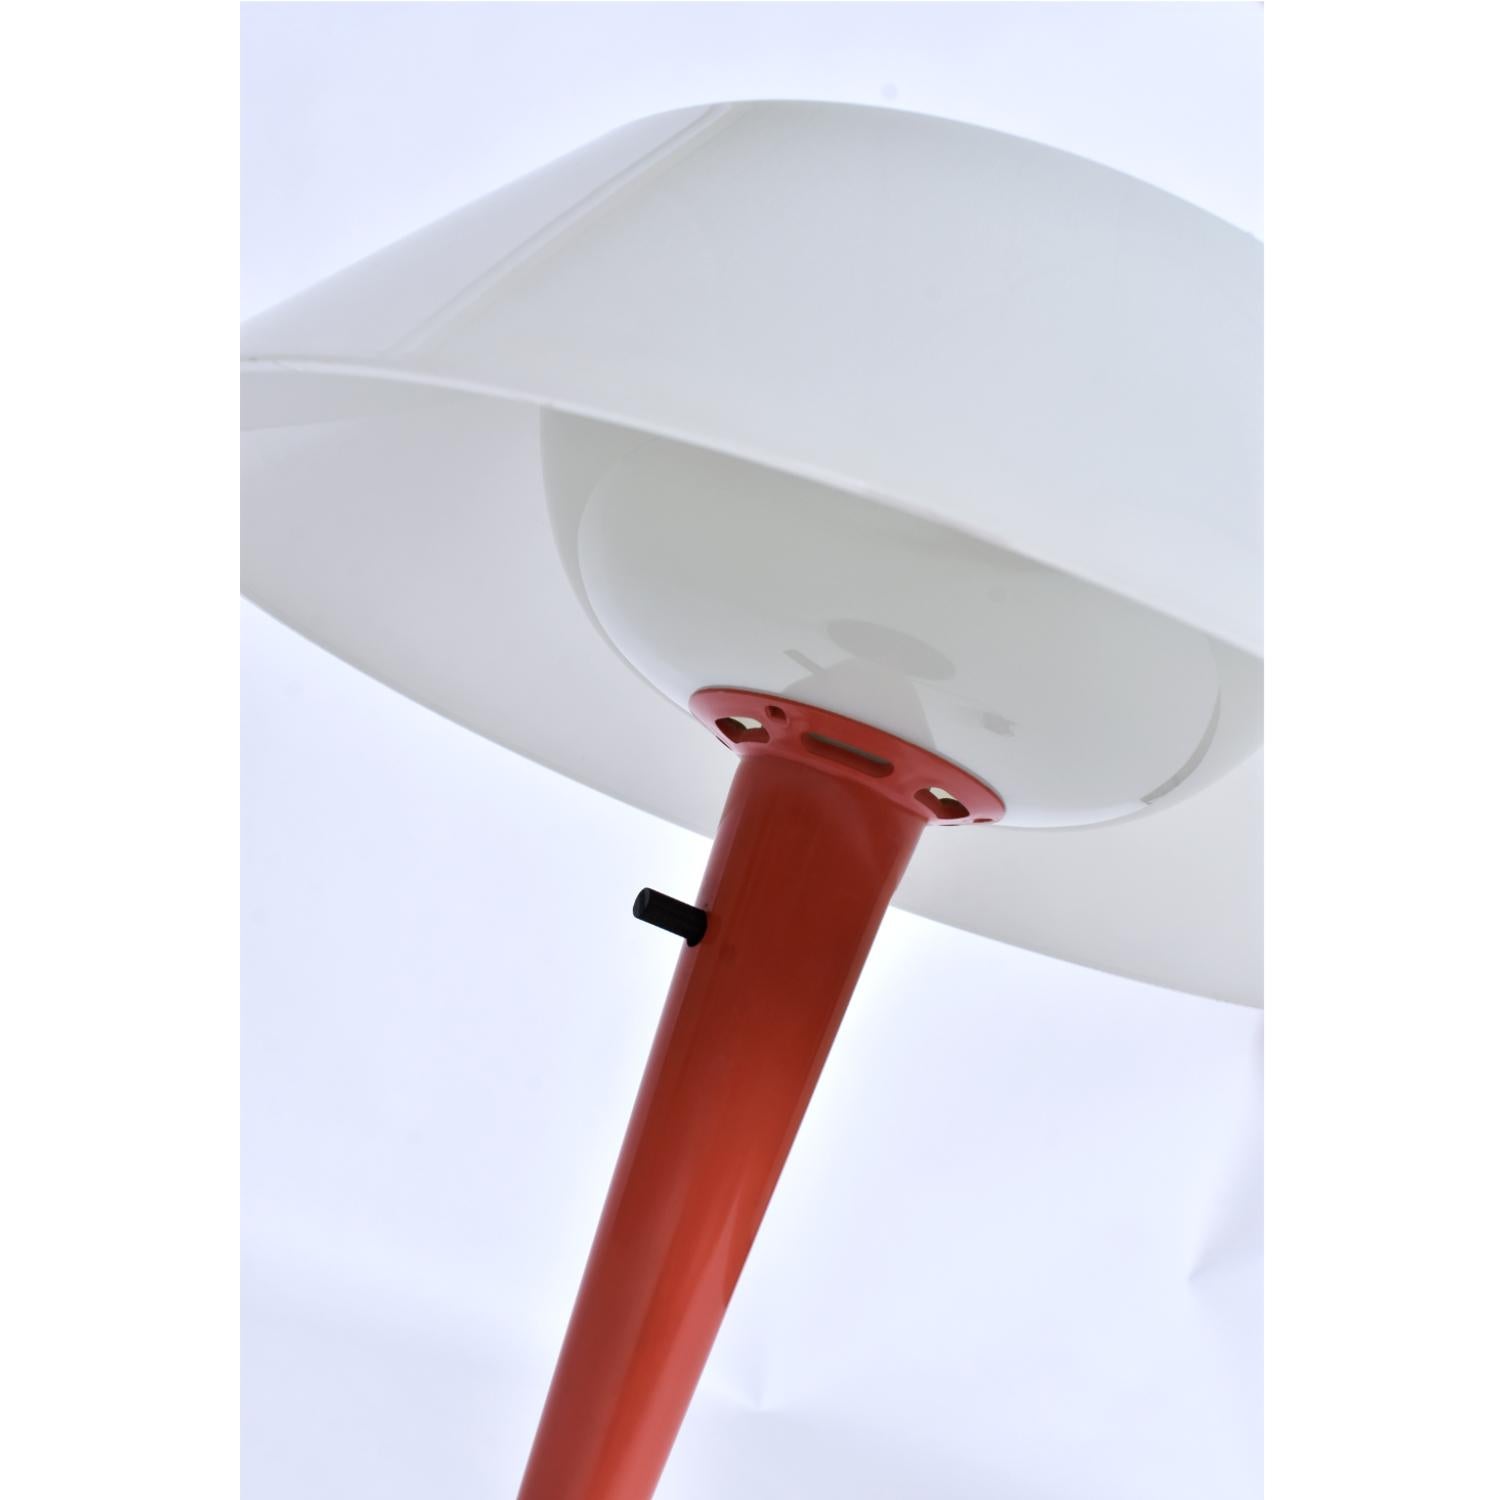 Unique table lamp from famed producer, Lightolier. Designed by Gerald Thurston, the lamp has a few Lightolier labels present. The minimalist design cuts a clean silhouette with its tapered cone shape. A mushroom shade adorns the top and is